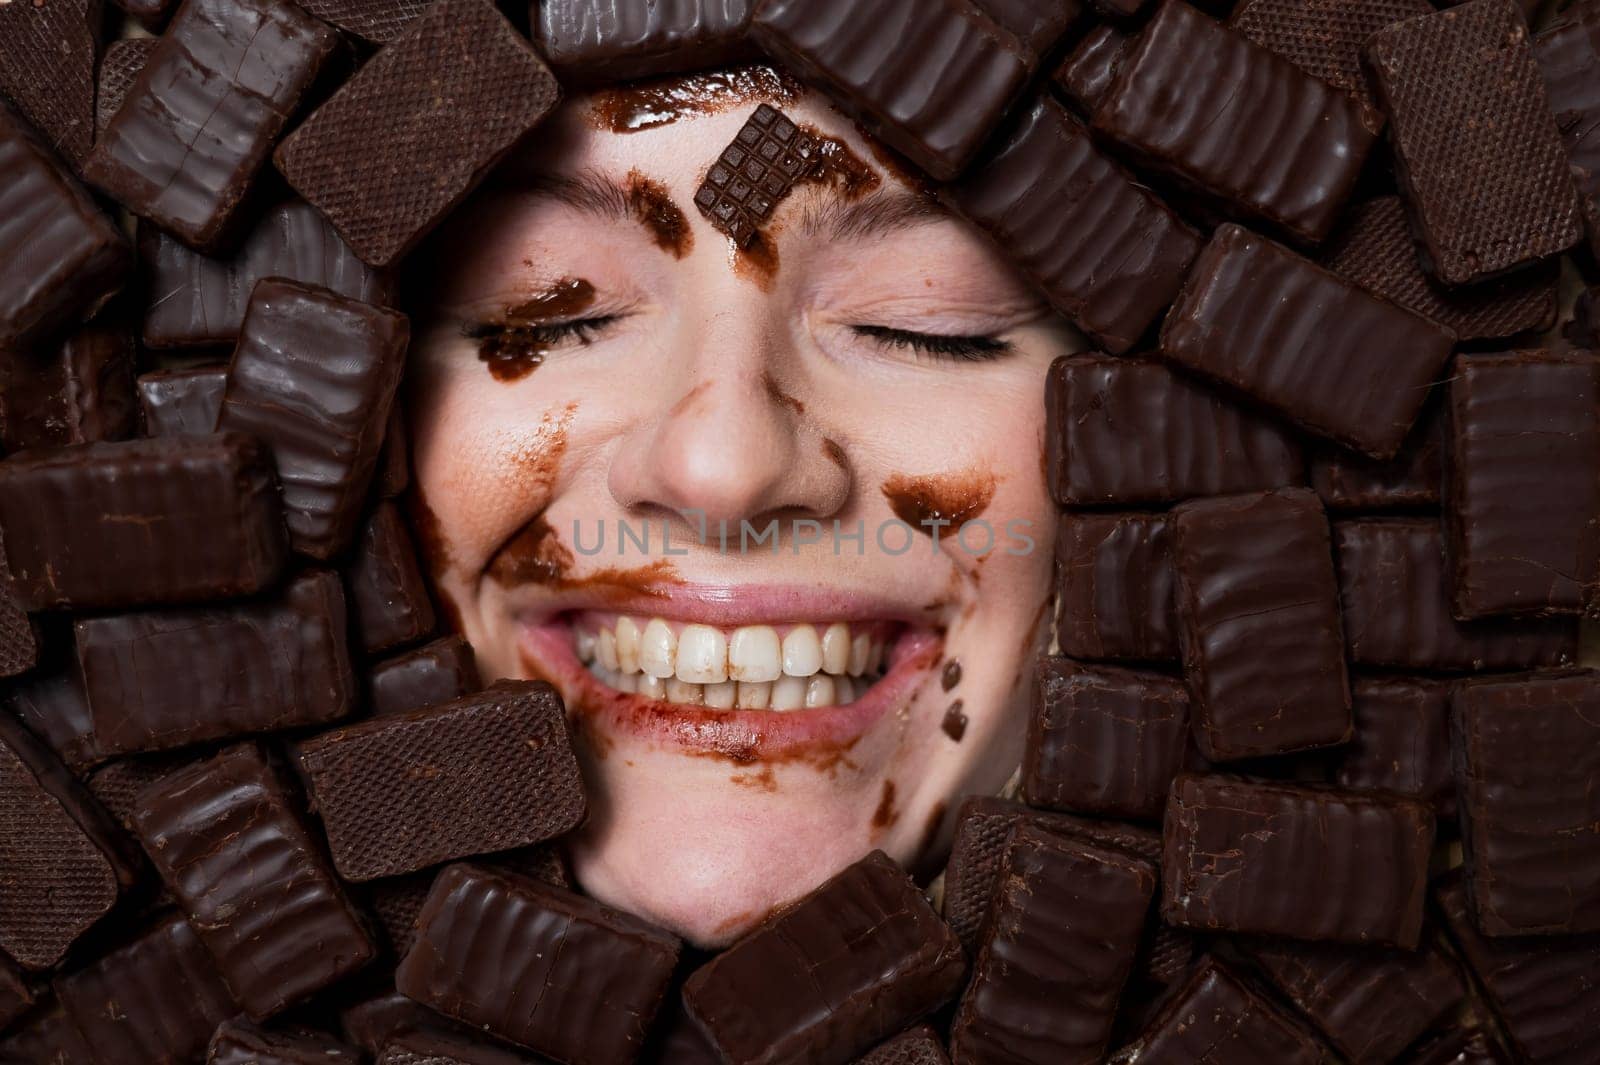 The face of a caucasian woman surrounded by sweets. The girl is smeared in chocolate